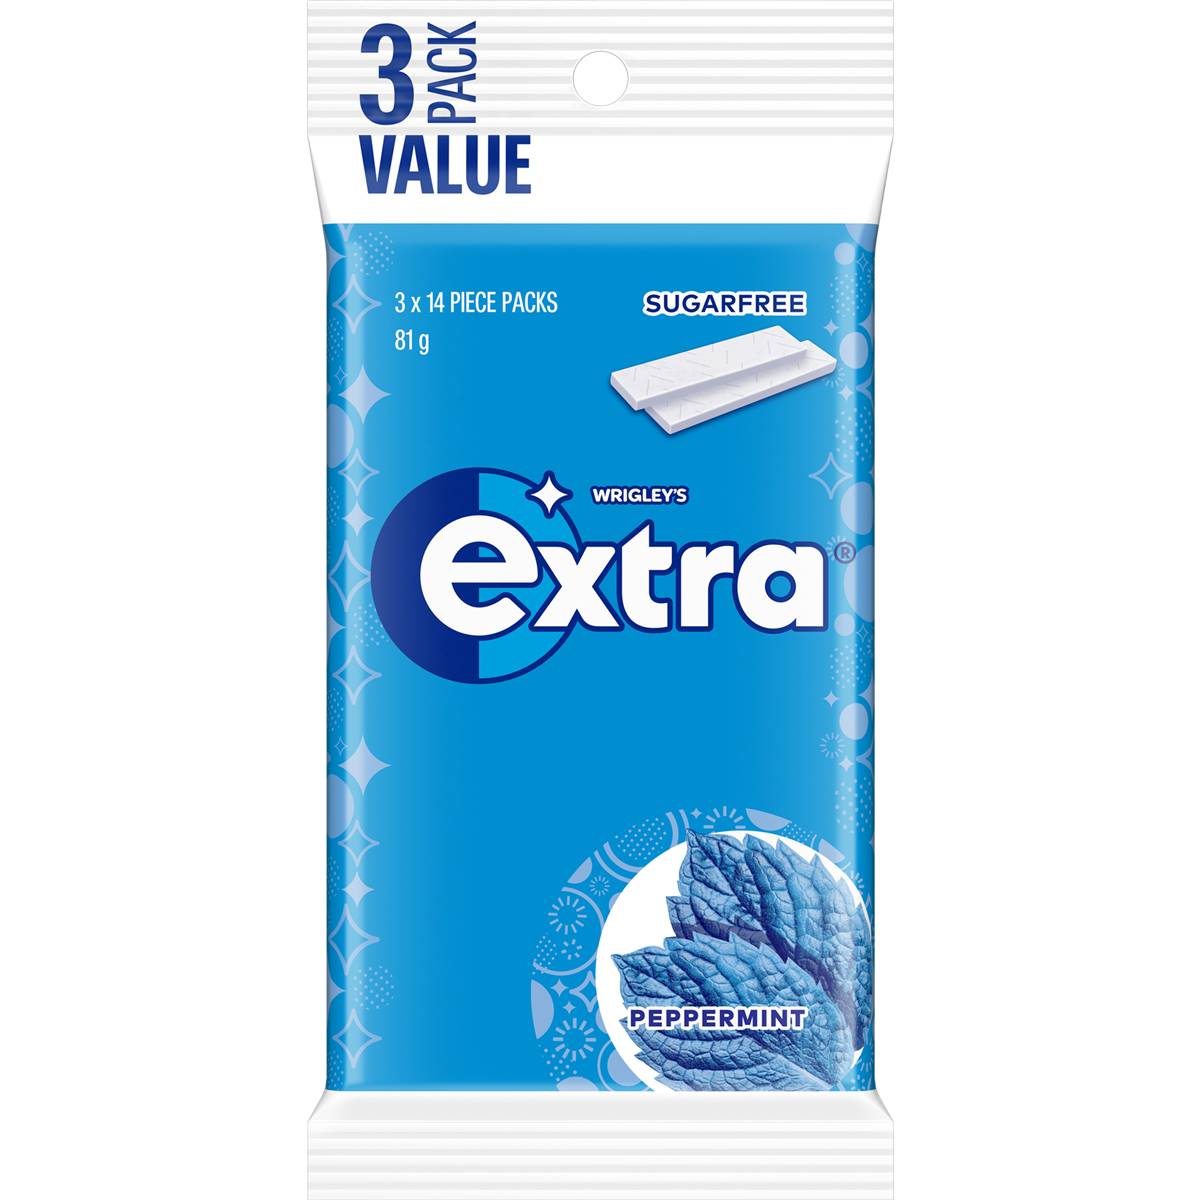 Calories in Extra Peppermint Chewing Gum Sugar Free Multipack 3x14 Piece